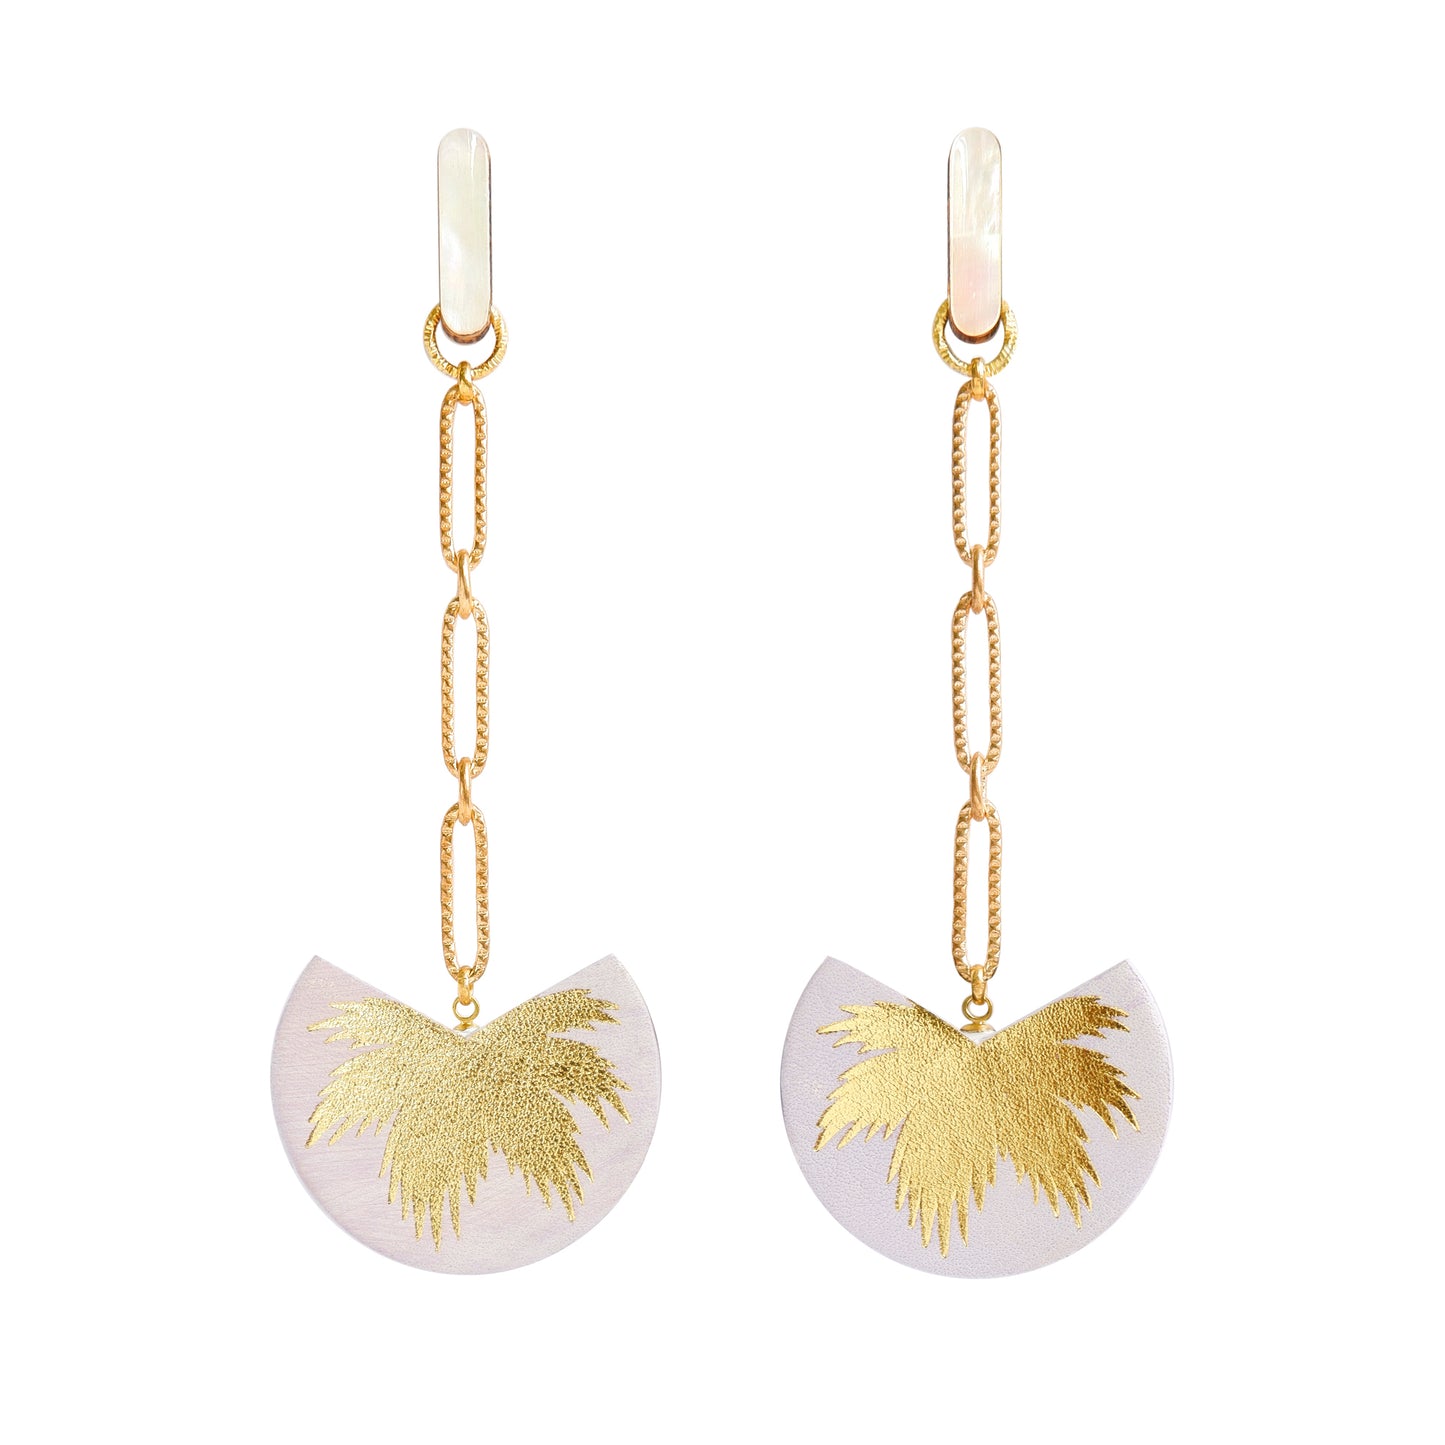 palm tree drop earrings. lilac leather medallions with gold palm print, on longl-link chain from long mother of pearl studs